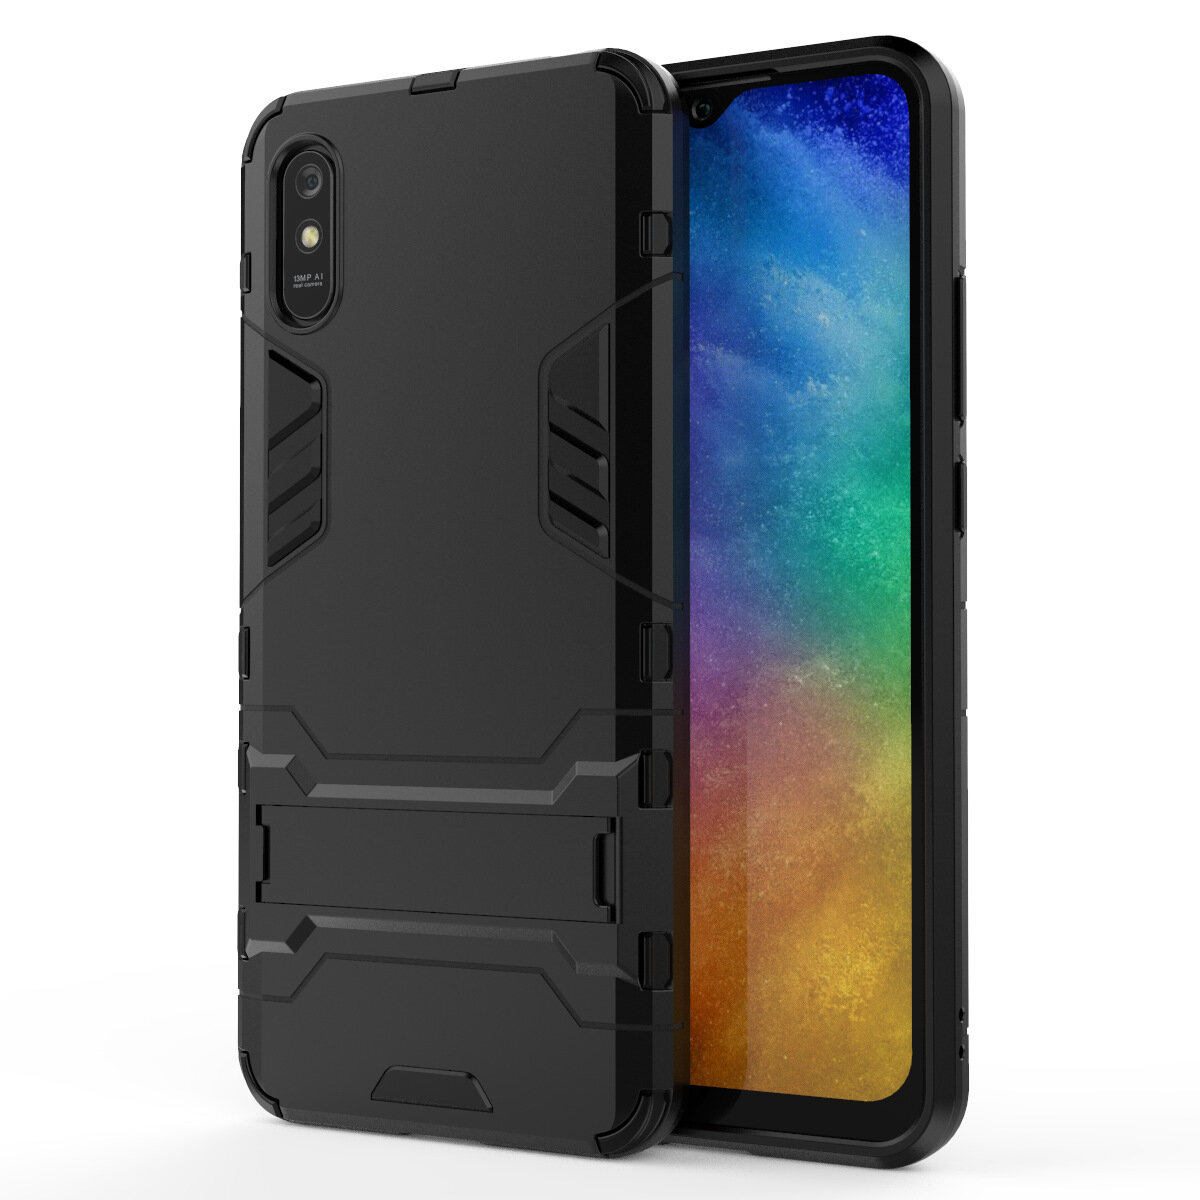 Bakeey for Xiaomi Redmi 9A Case Armor Shockproof with Stand Holder Back Cover Protective Case | Non-original COD